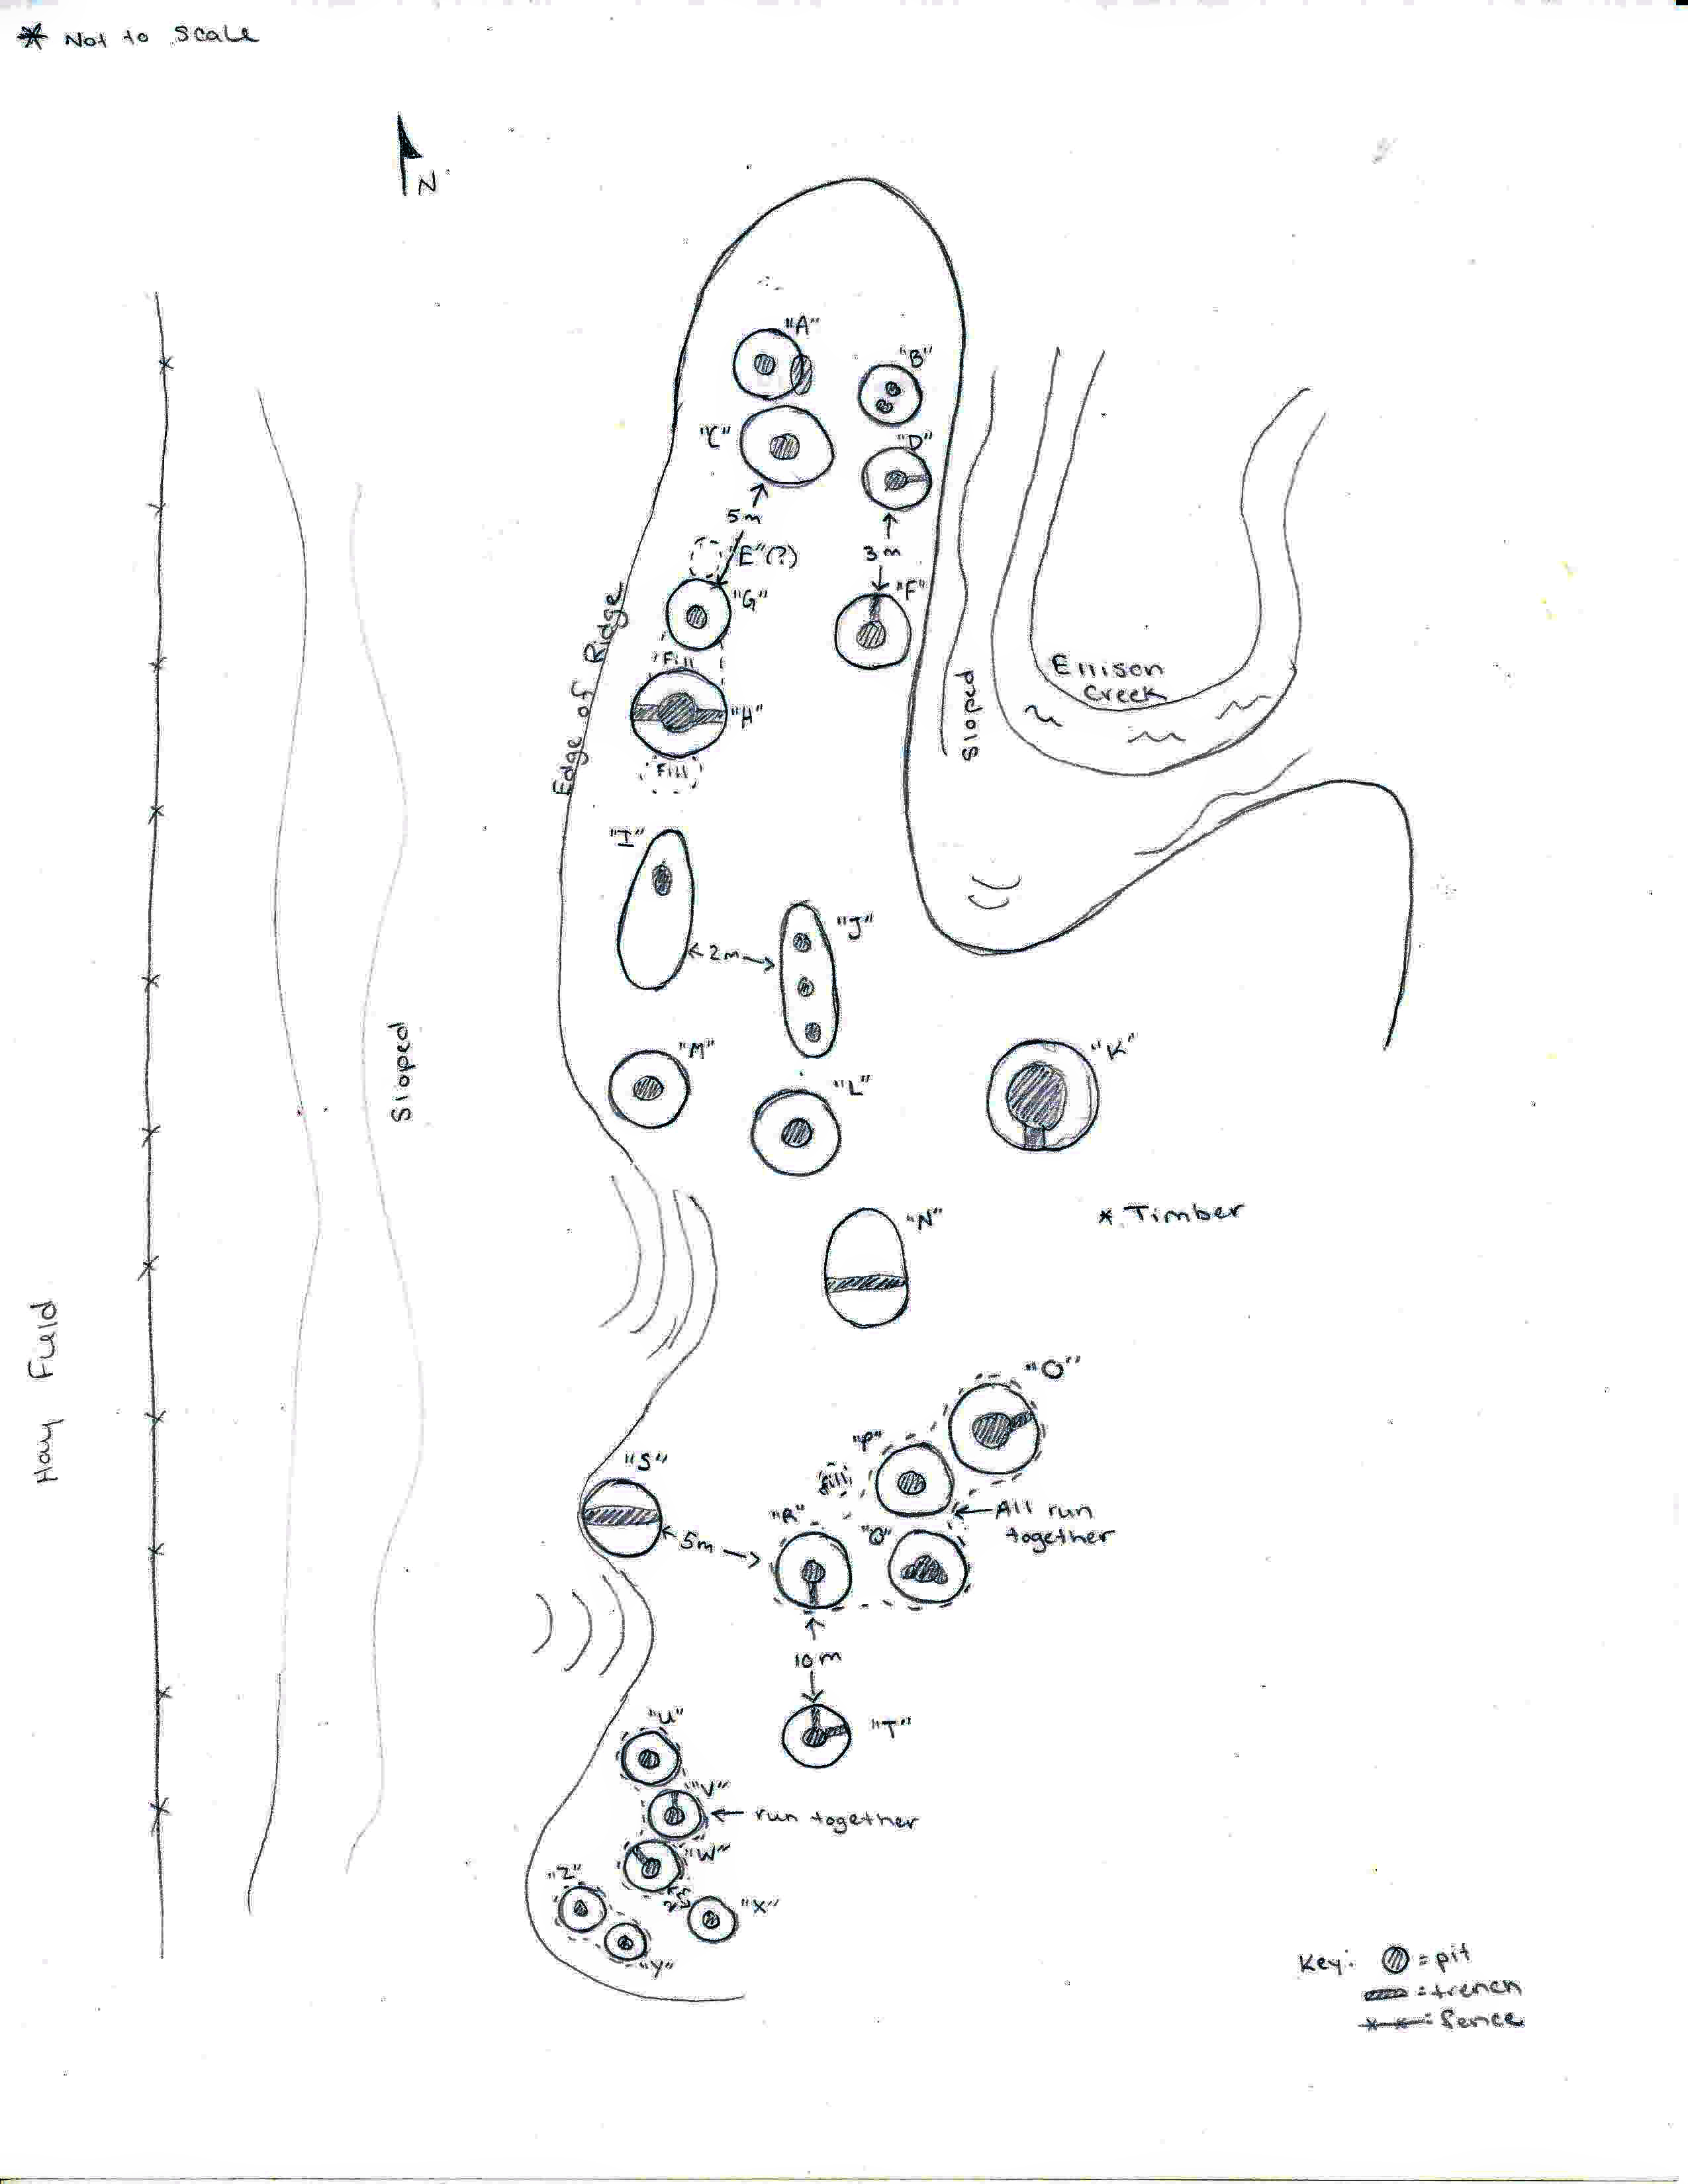 Sketch Map of Dowell Mounds (US 34)